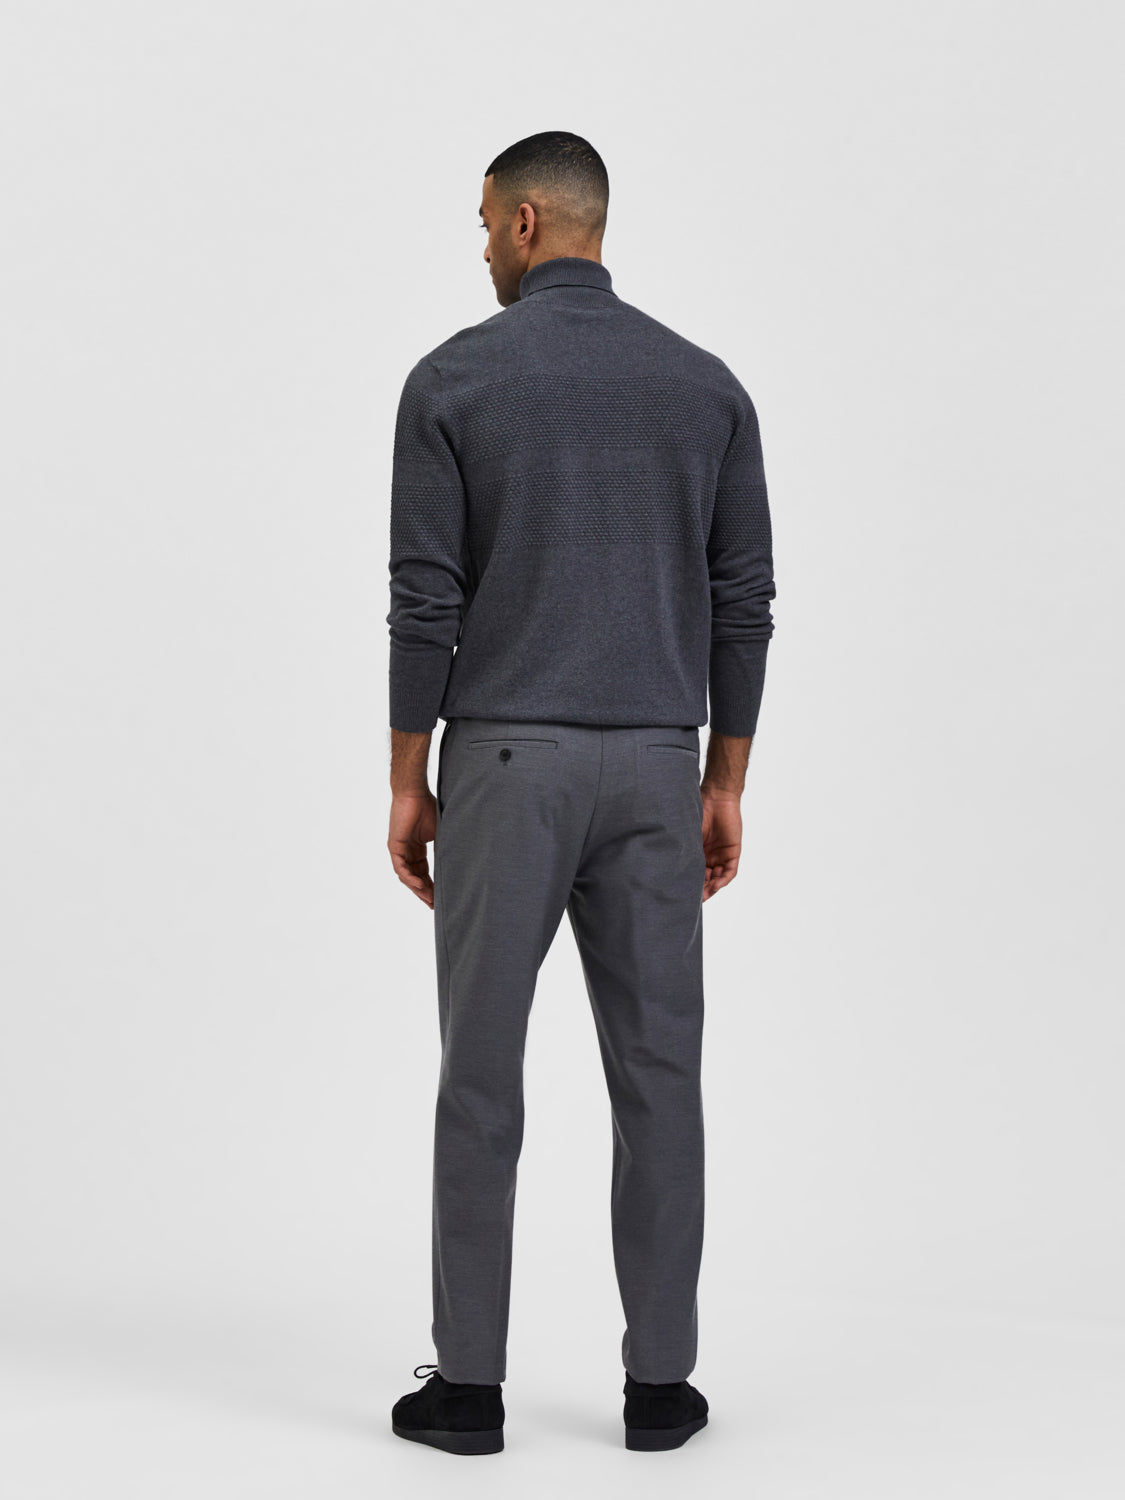 SELECTED HOMME - SLIM-DAVE Pants - Grey